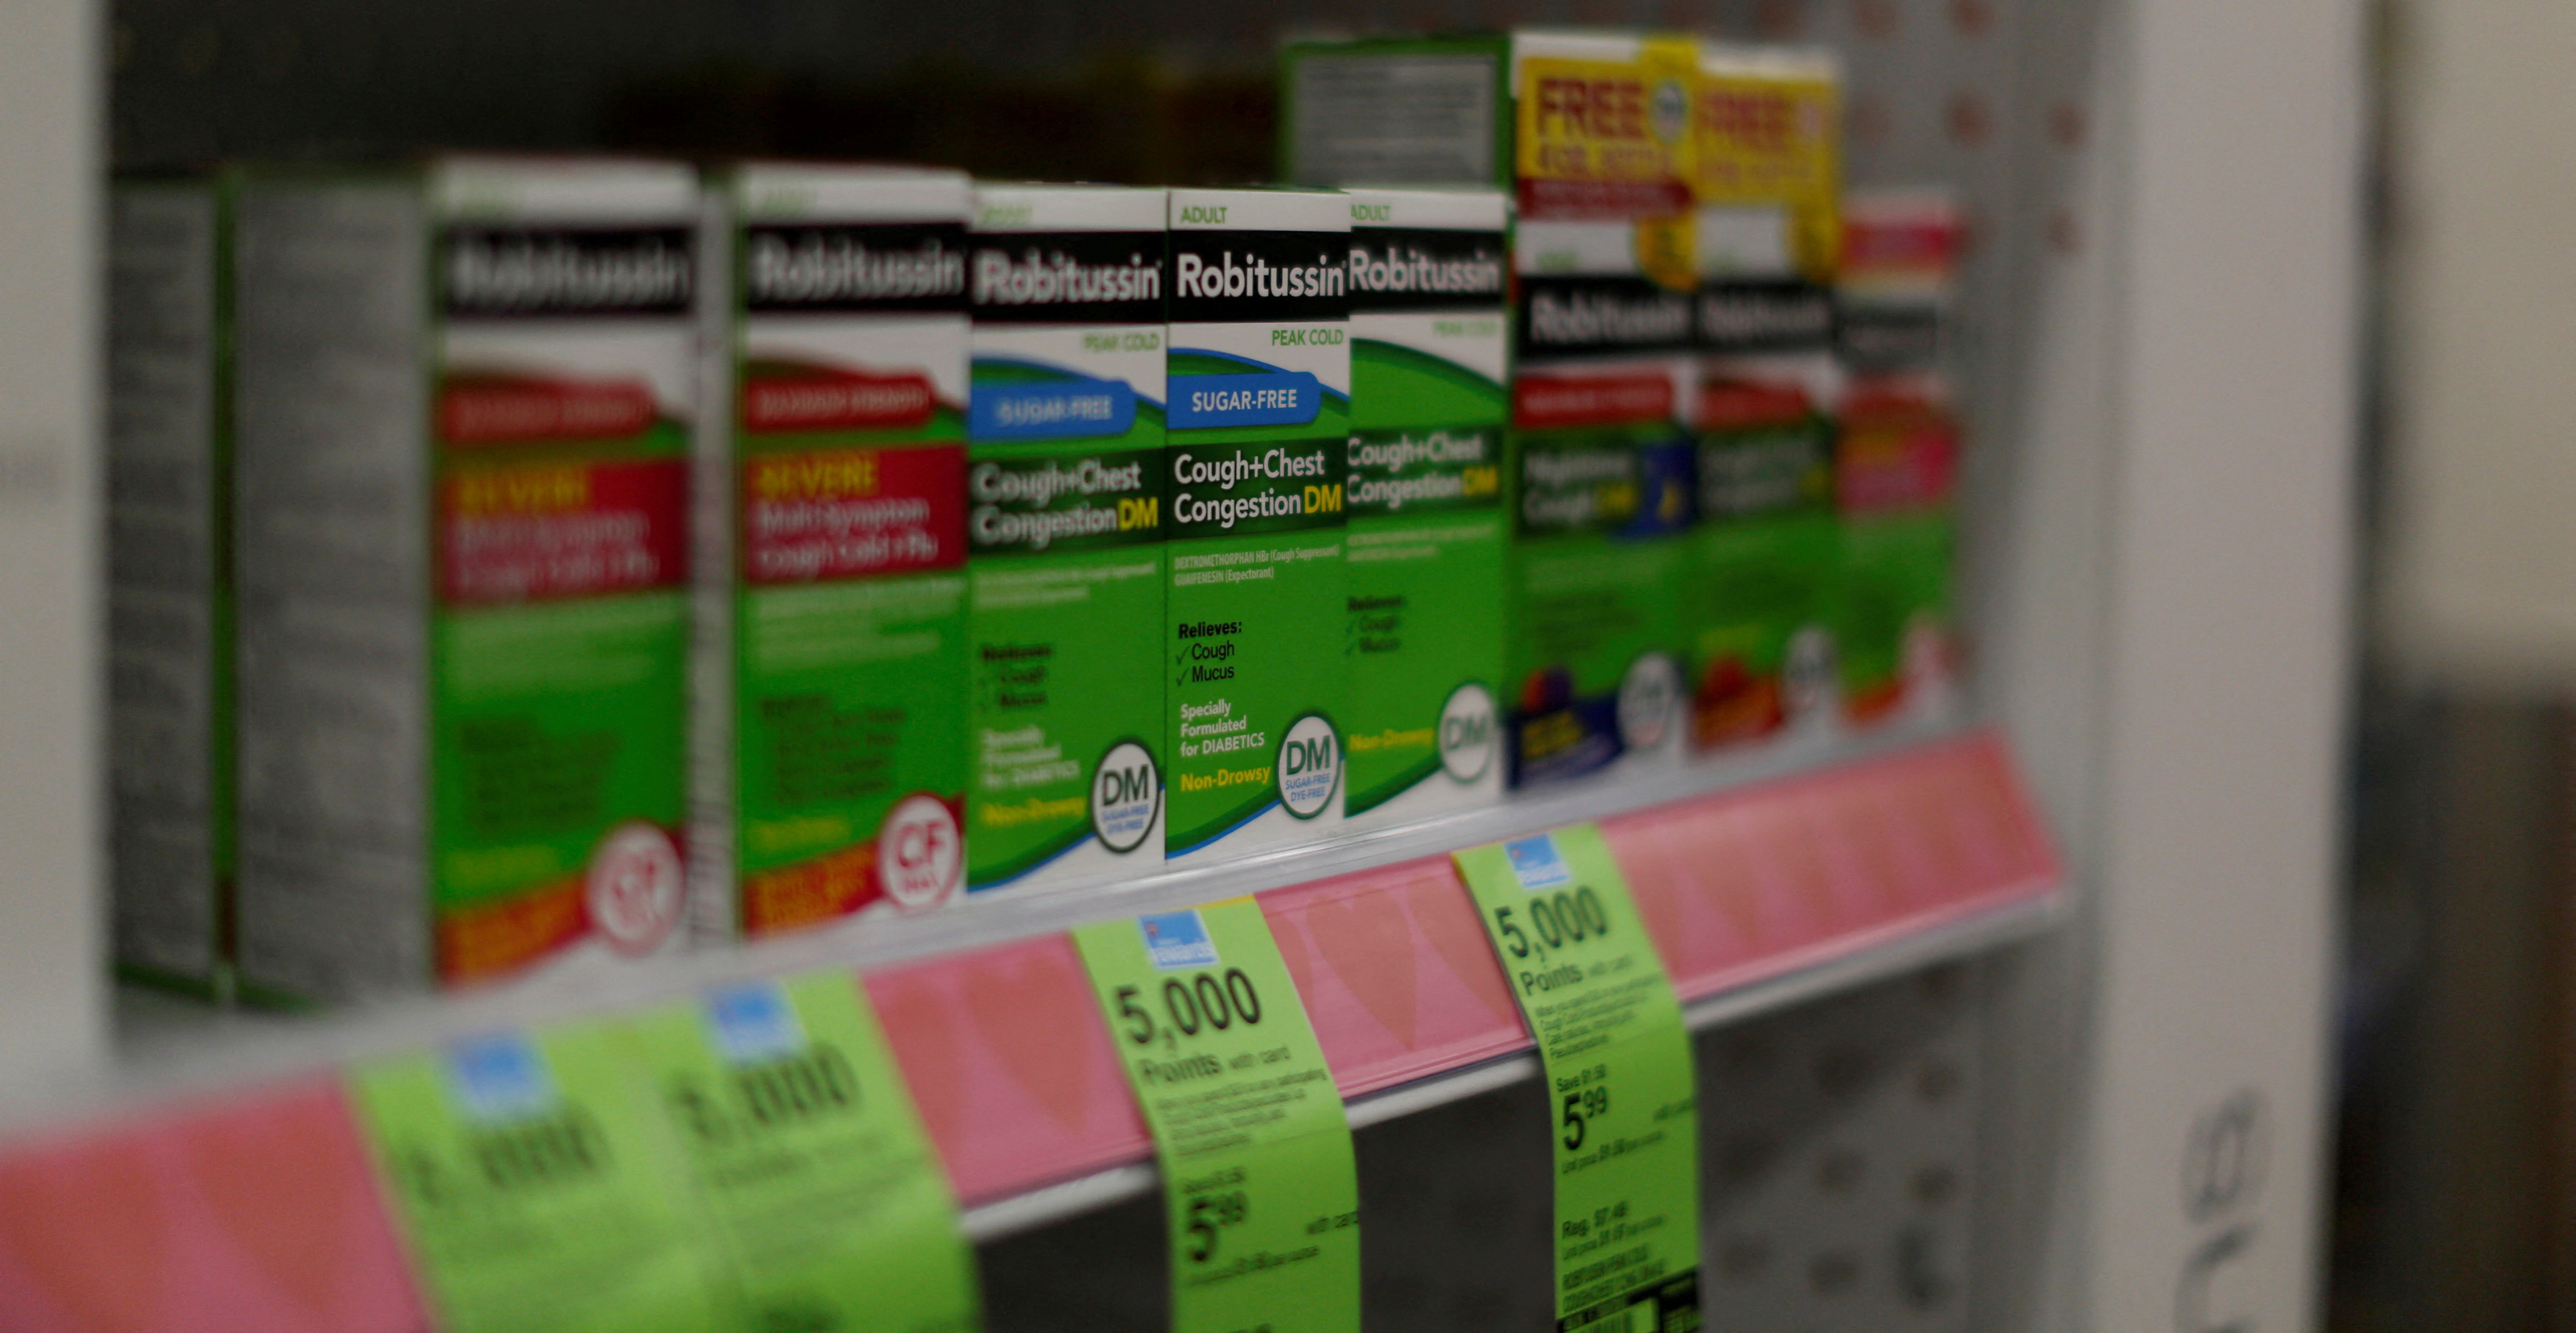 Robitussin products are pictured at a Walgreens store in Pasadena